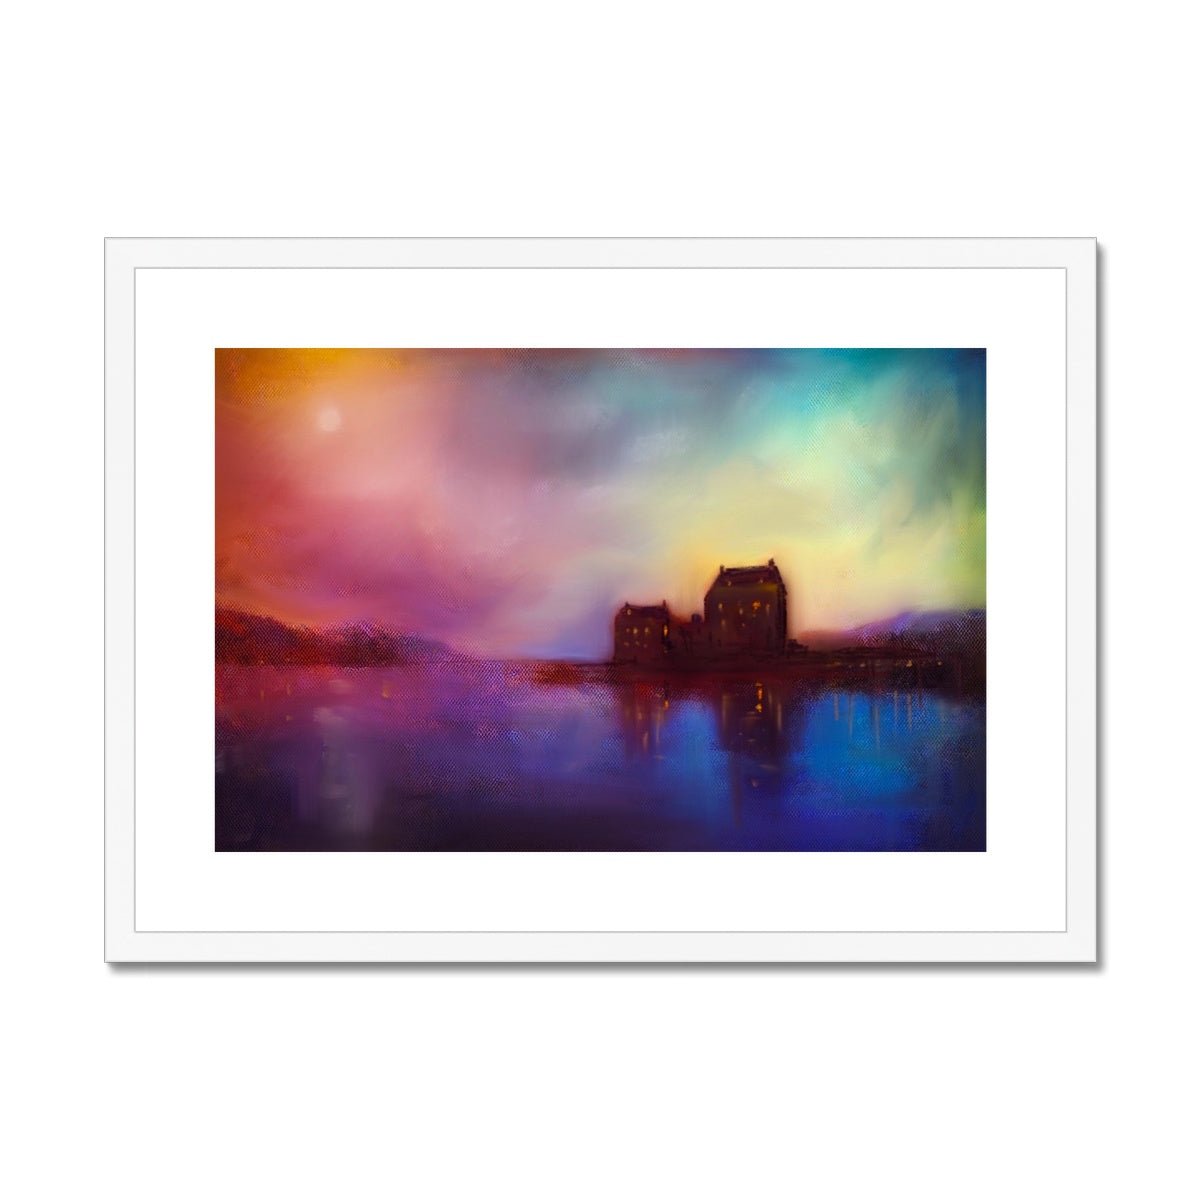 Eilean Donan Castle Sunset Painting | Framed & Mounted Prints From Scotland-Framed & Mounted Prints-Historic & Iconic Scotland Art Gallery-A2 Landscape-White Frame-Paintings, Prints, Homeware, Art Gifts From Scotland By Scottish Artist Kevin Hunter